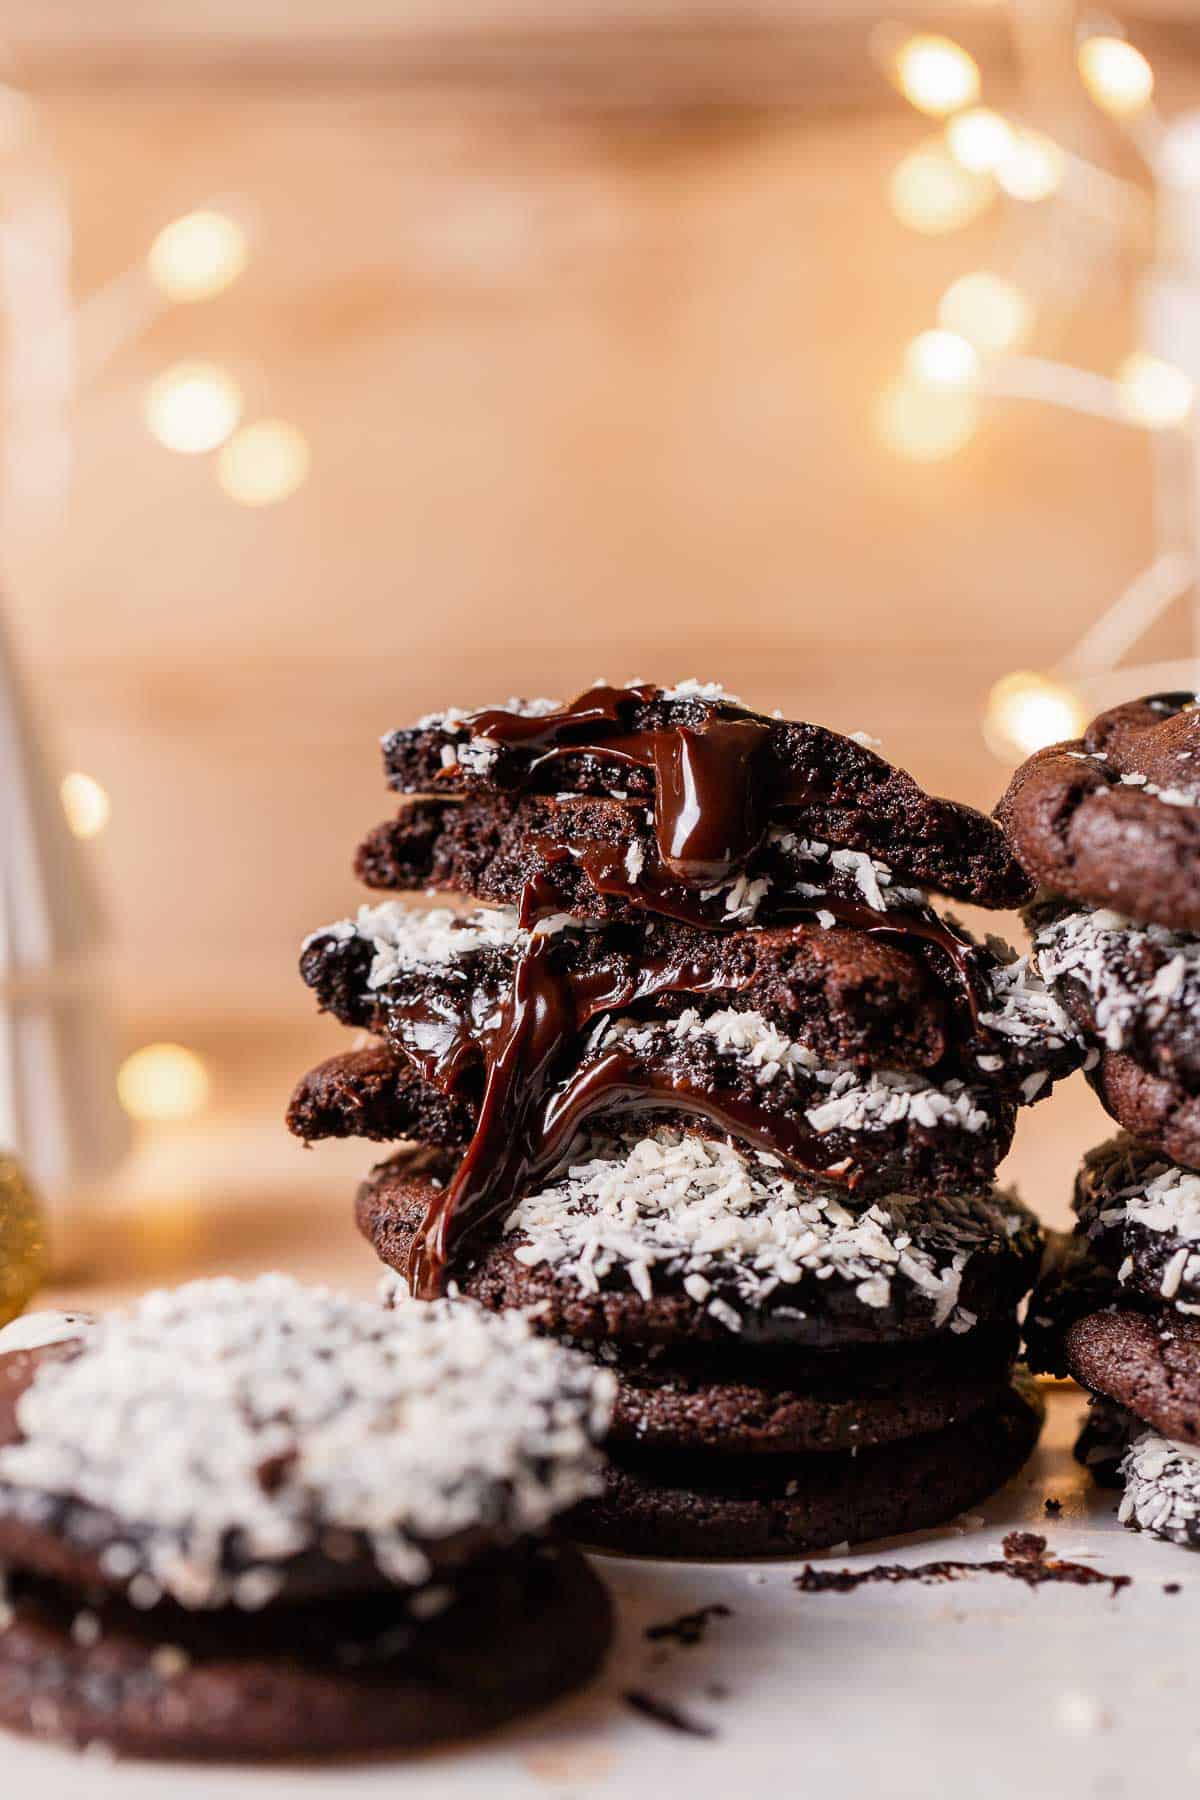 A stack of chocolate cookies with fudge filling oozing out.